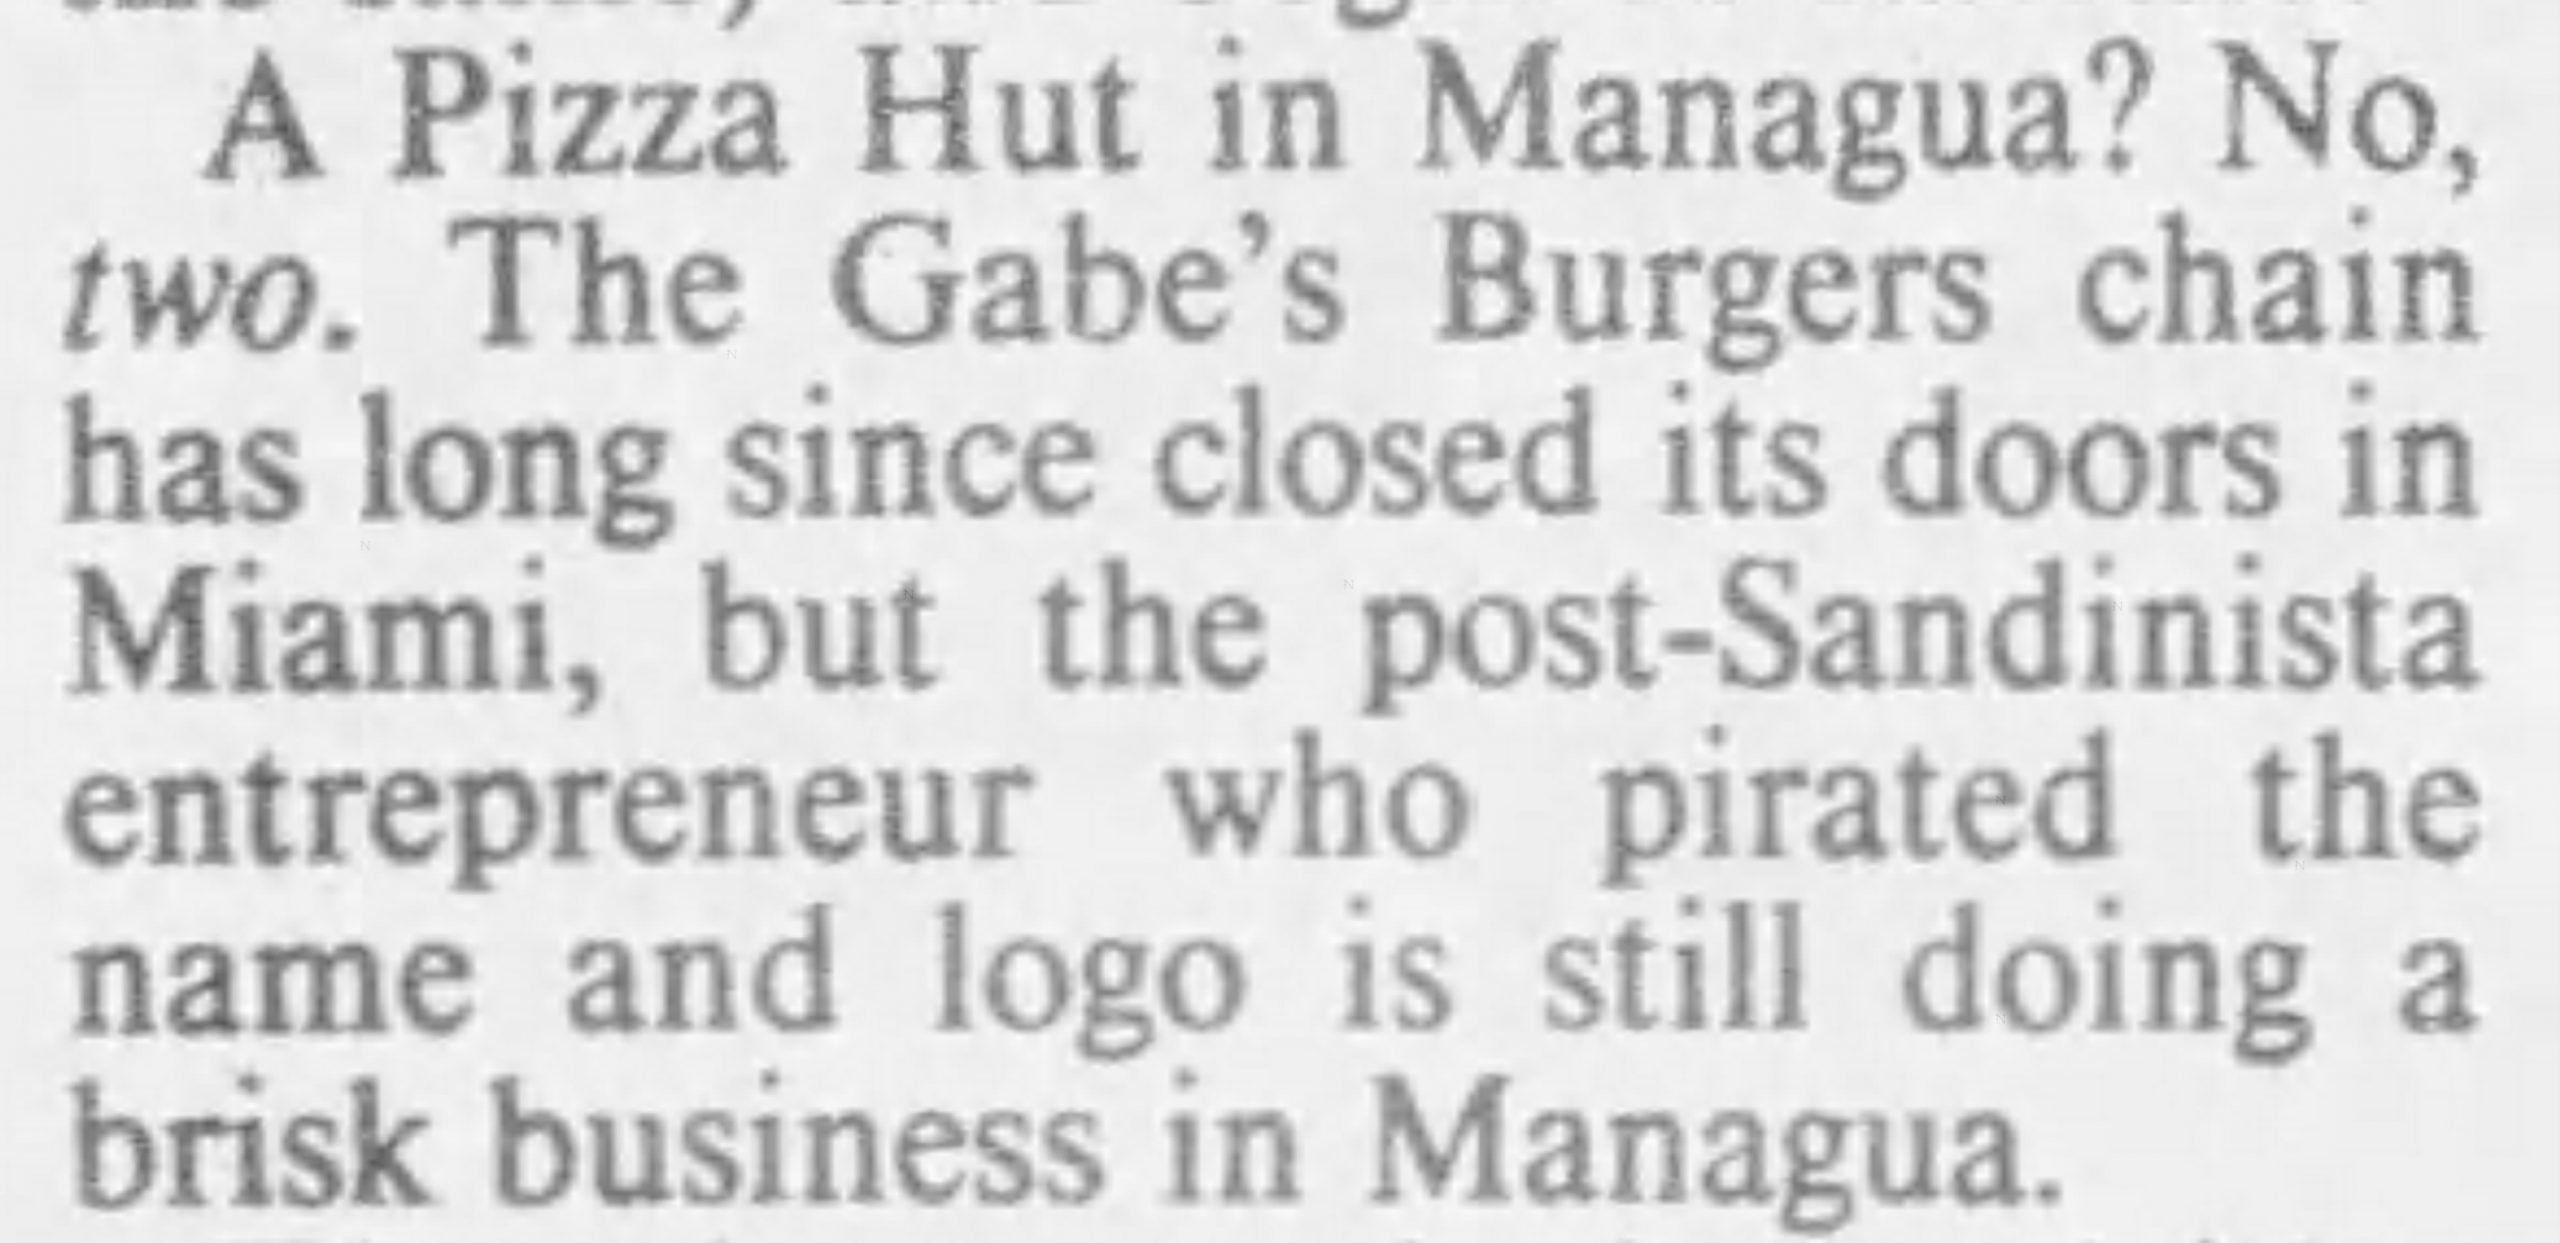 GABE's mention in the Miami Herald May, 9, 1996